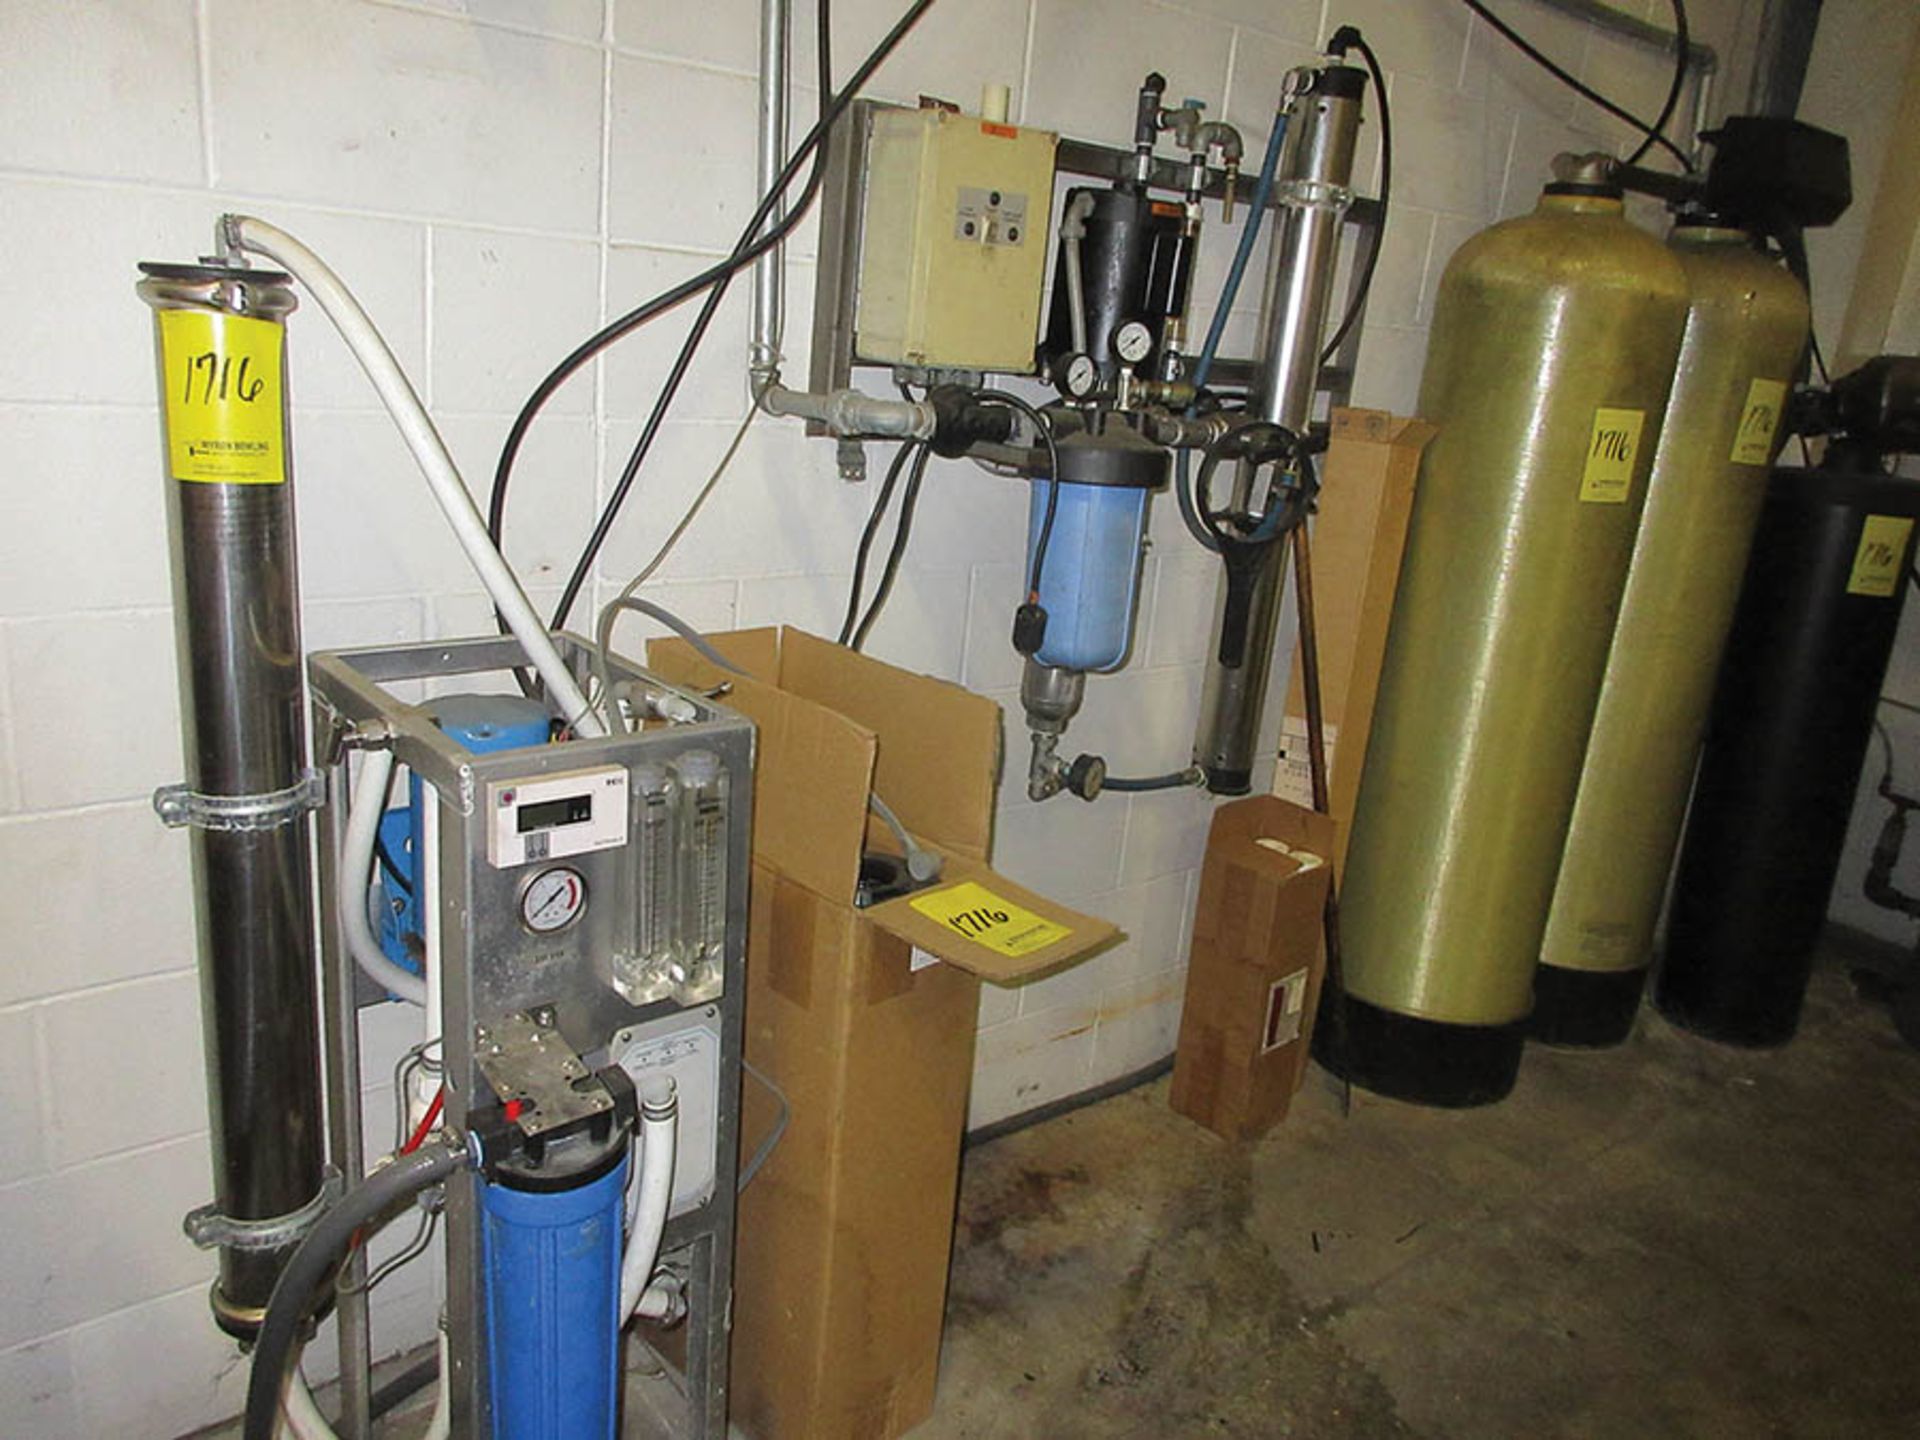 WATER SOFTENER/FILTRATION SYSTEM USED WITH WASH LINE, ECONO FLOW BOOSTER PUMP, GOULDS BOOSTER